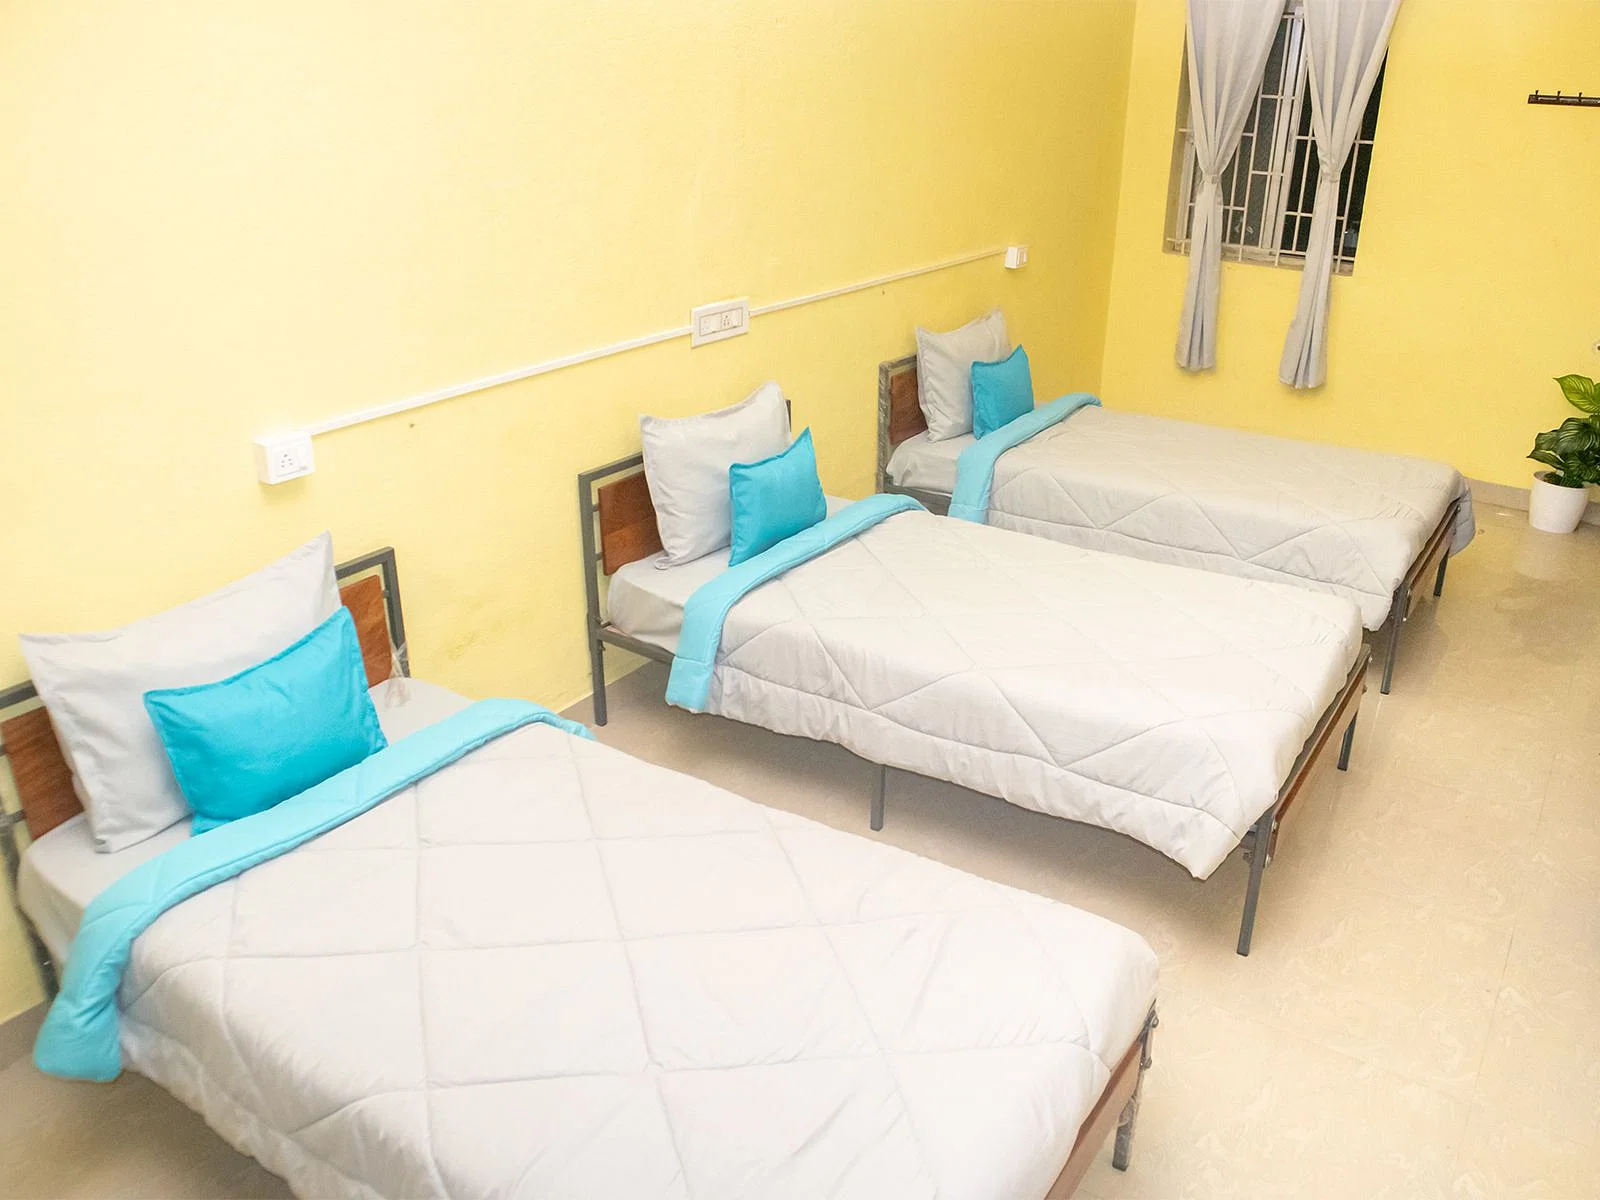 budget-friendly PGs and hostels for unisex with single rooms with daily hopusekeeping-Zolo Papillon